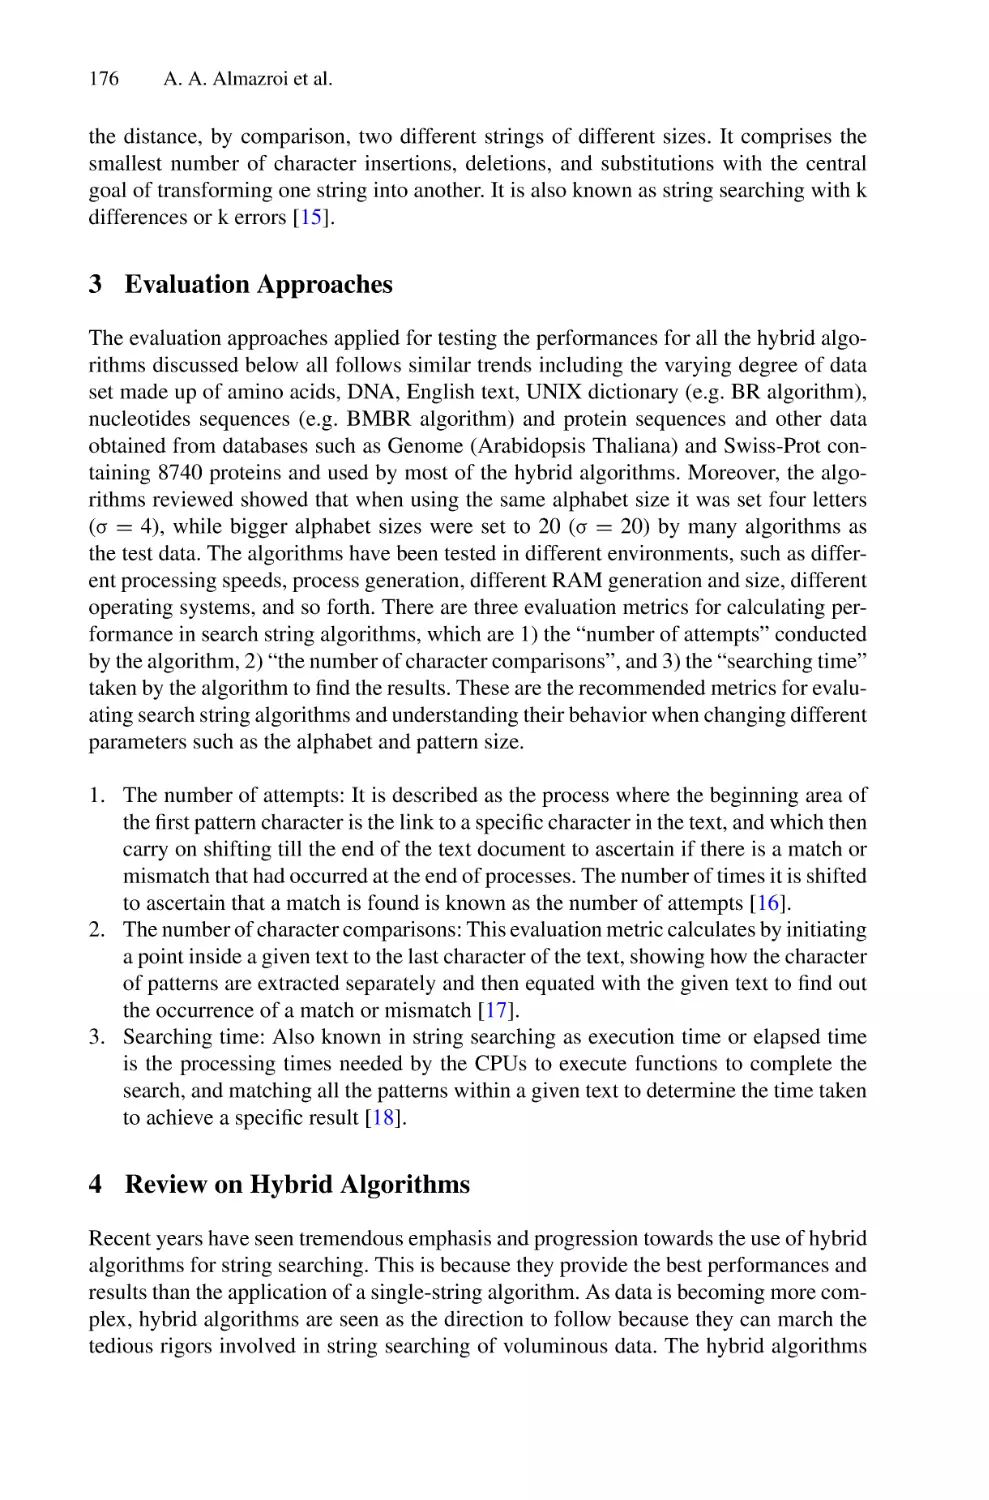 3 Evaluation Approaches
4 Review on Hybrid Algorithms